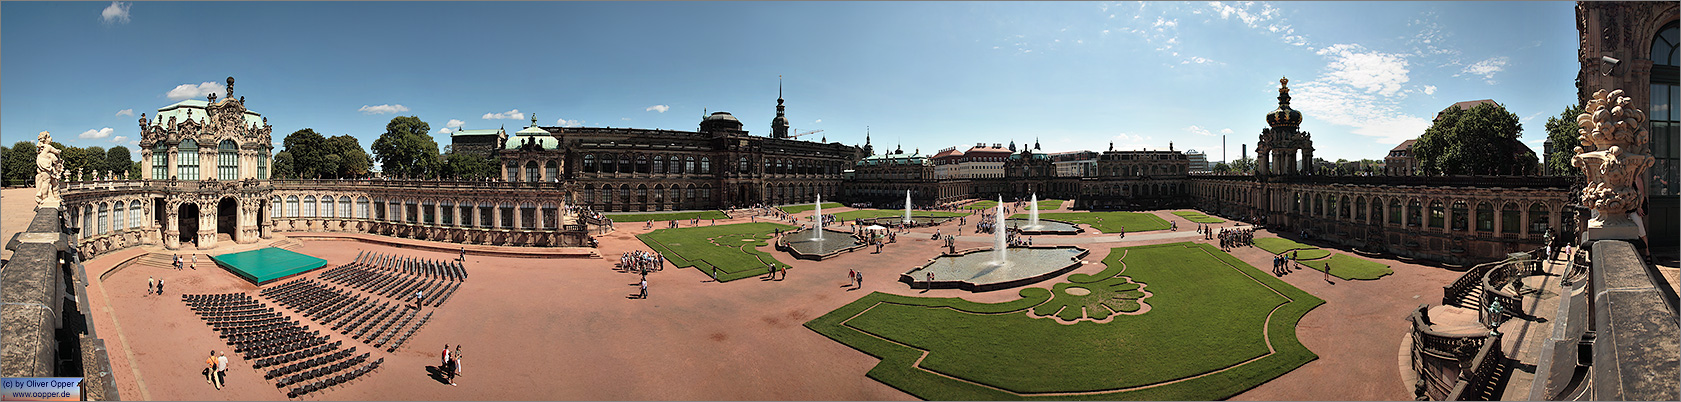 Panorama Dresden - Zwinger - p24 - (c) by Oliver Opper